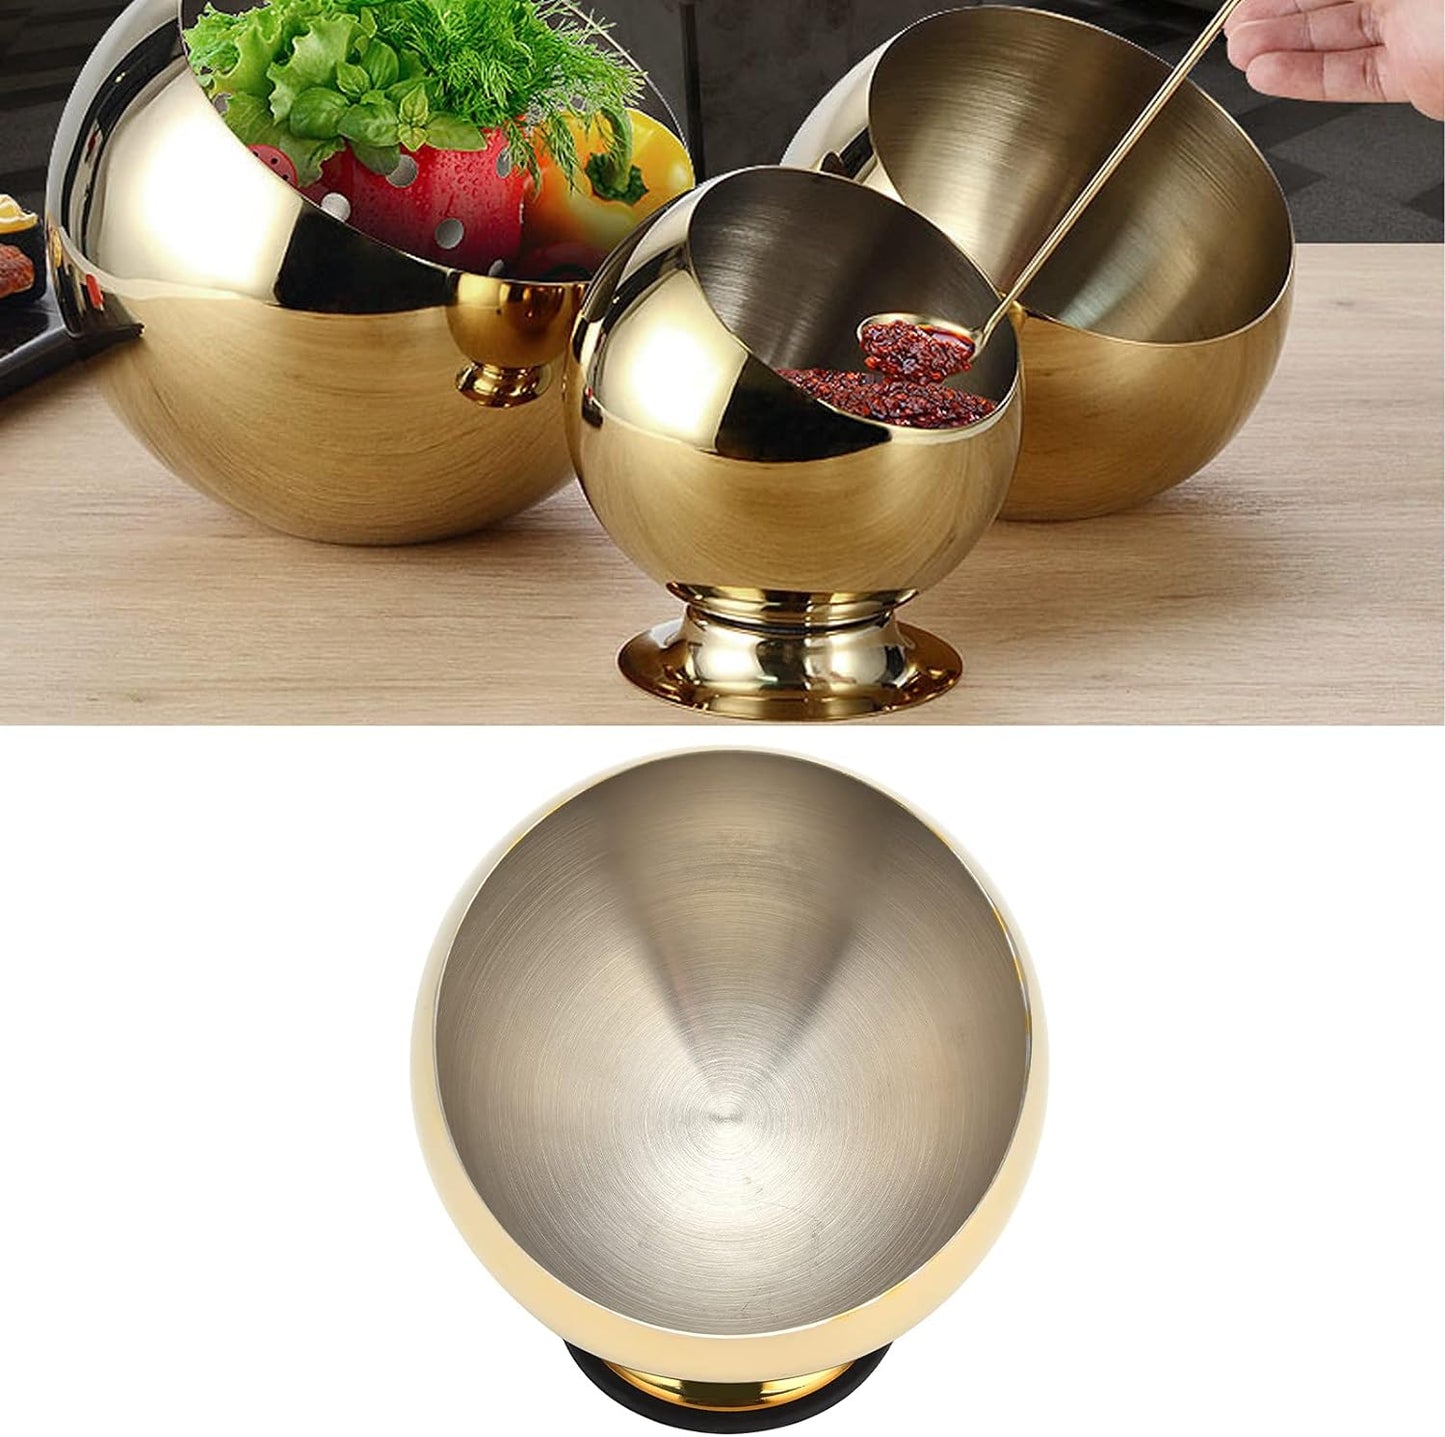 22cm Gold Saucer Bowl For Sauce, Snack, Appetizers